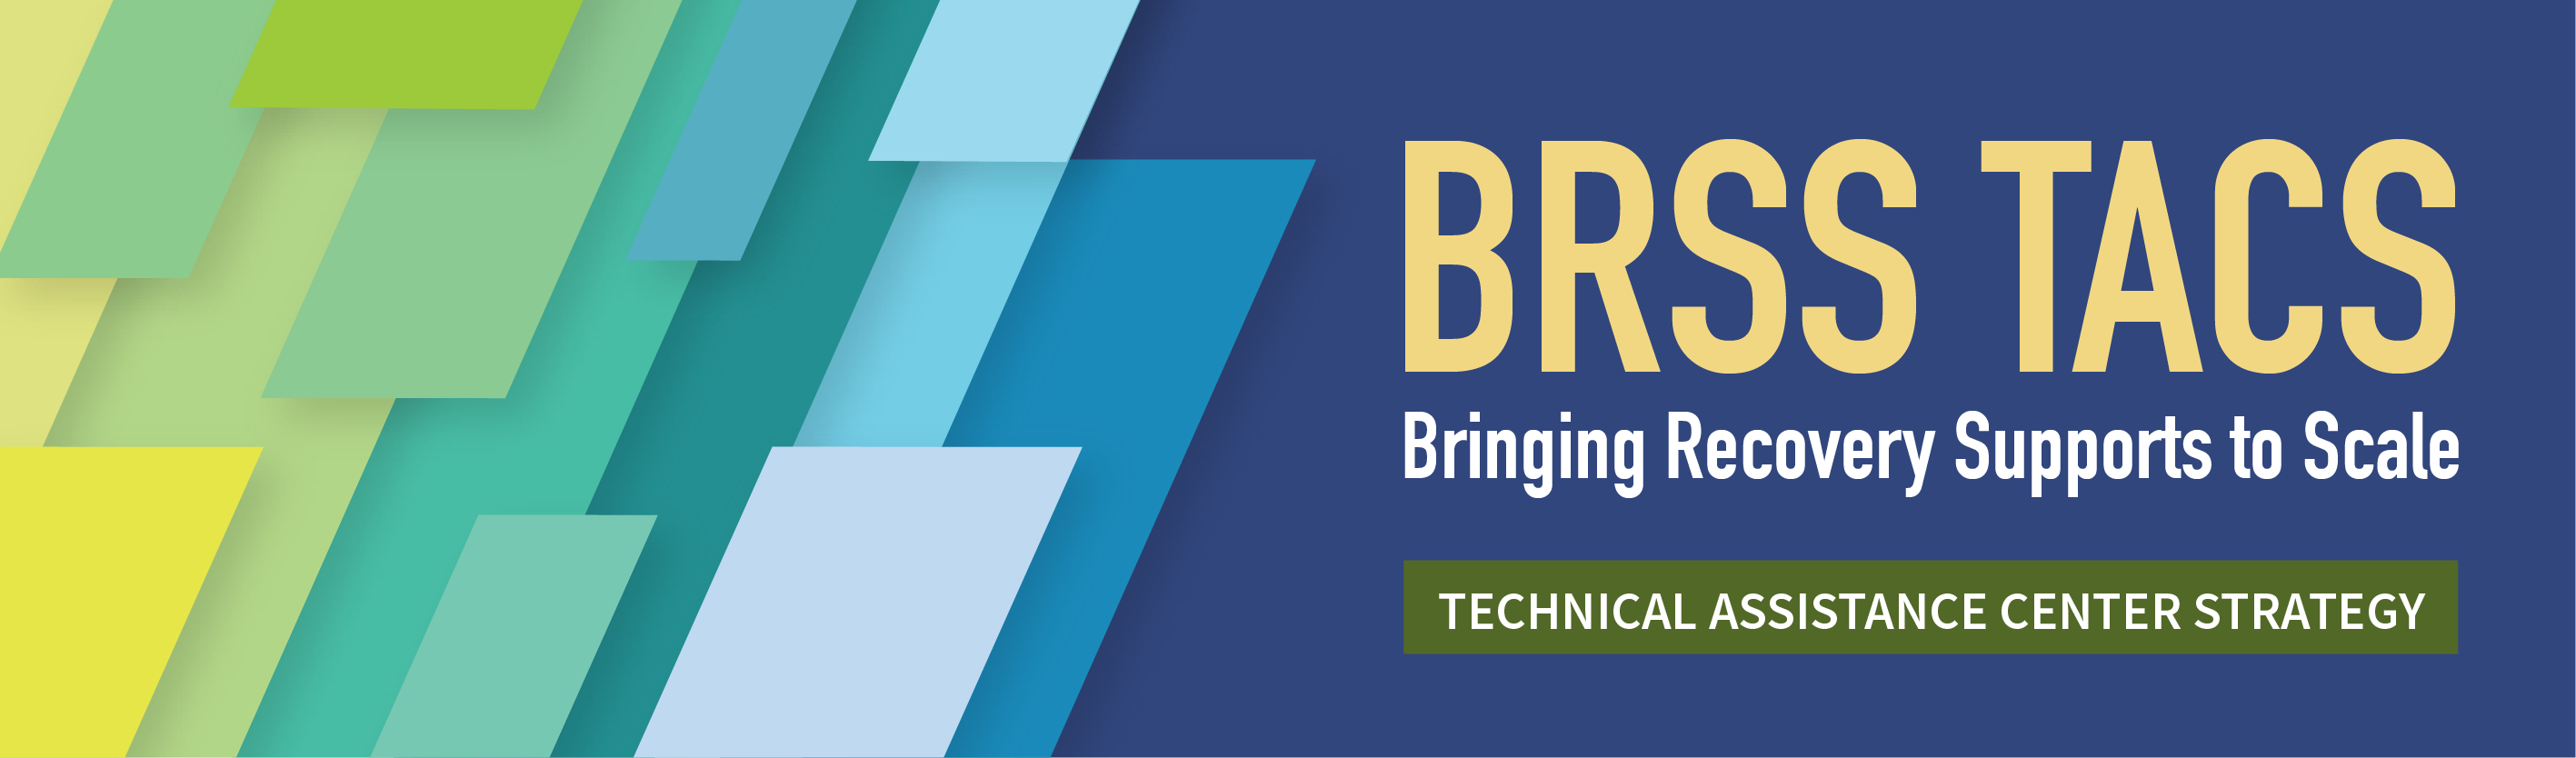 Bringing Recovery Supports to Scale Technical Assistance Center Strategy (BRSS TACS) banner